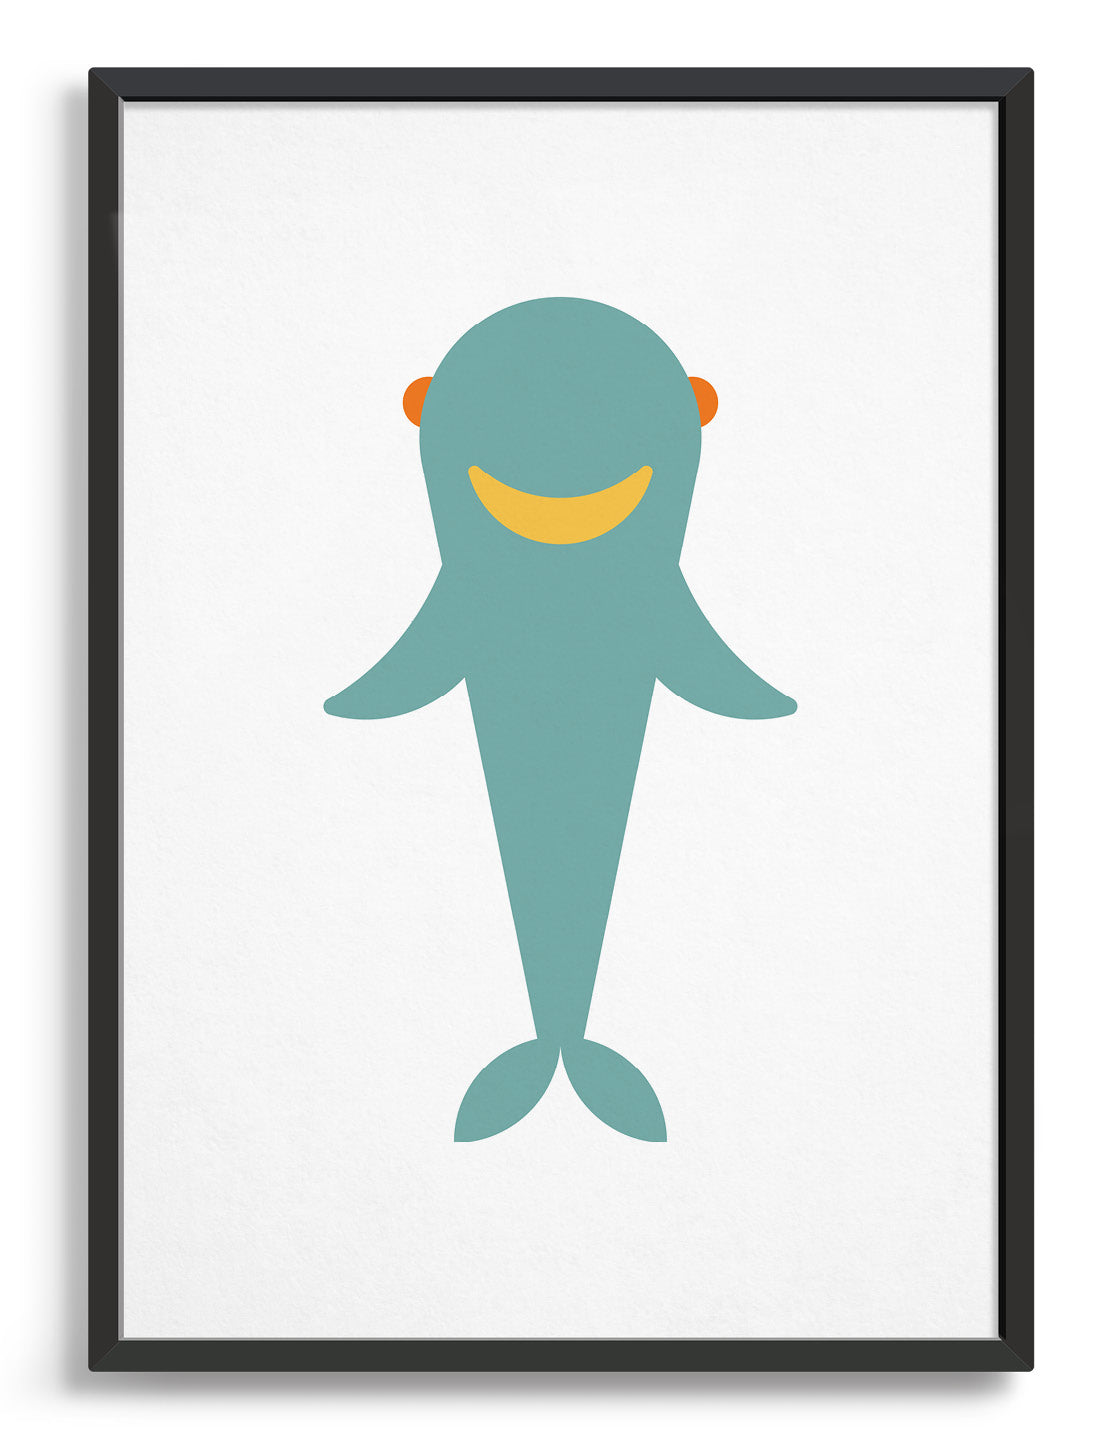 Kids cute baby shark print featuring a blue shark against a white background with a happy smiling face